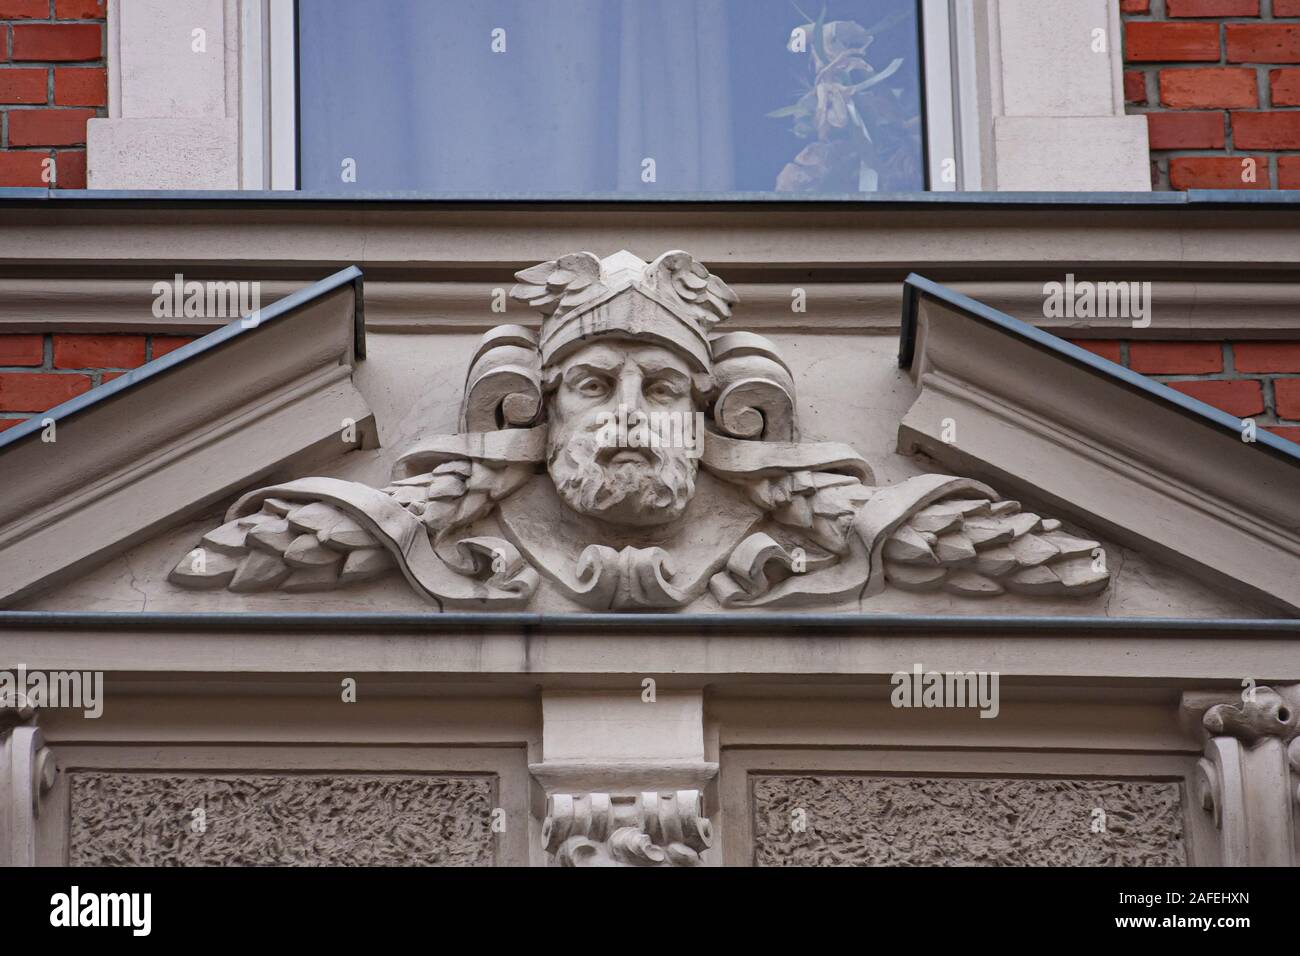 Mascaron face architecture elements decoration red-brick german style tenement wall stucco texture reference Stock Photo